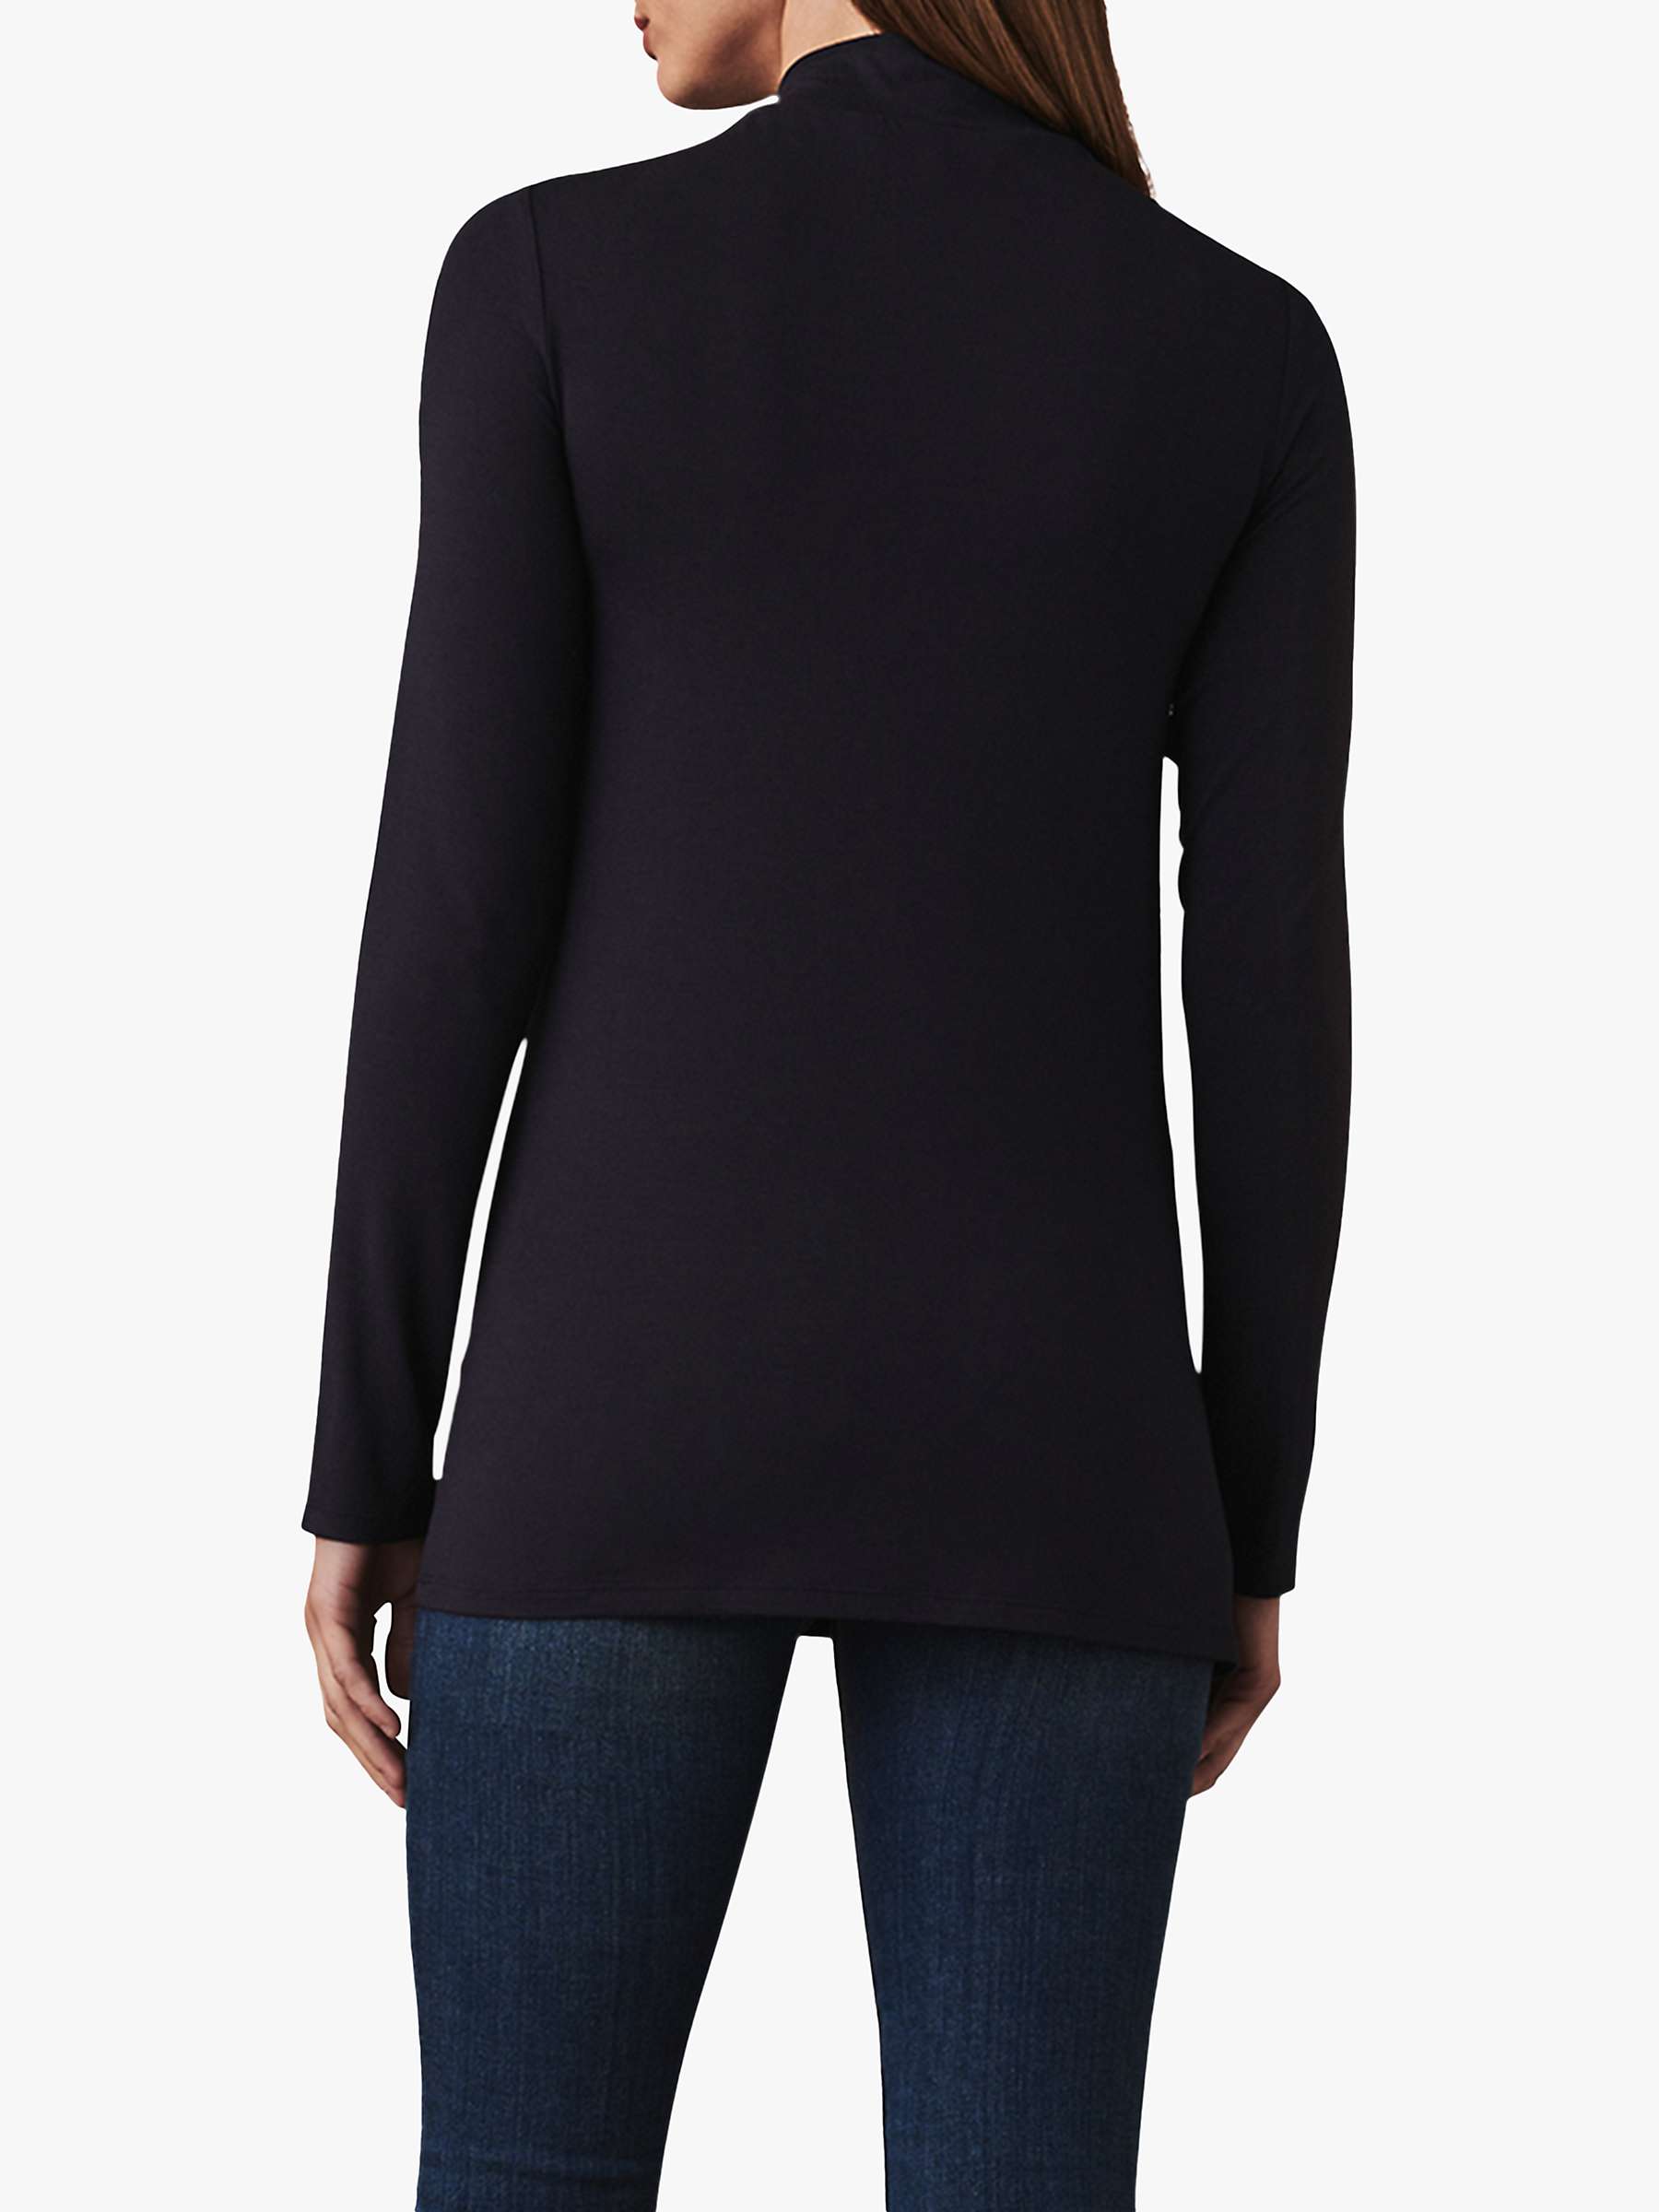 Buy Crew Clothing Second Skin Polo Neck Top, Navy Online at johnlewis.com